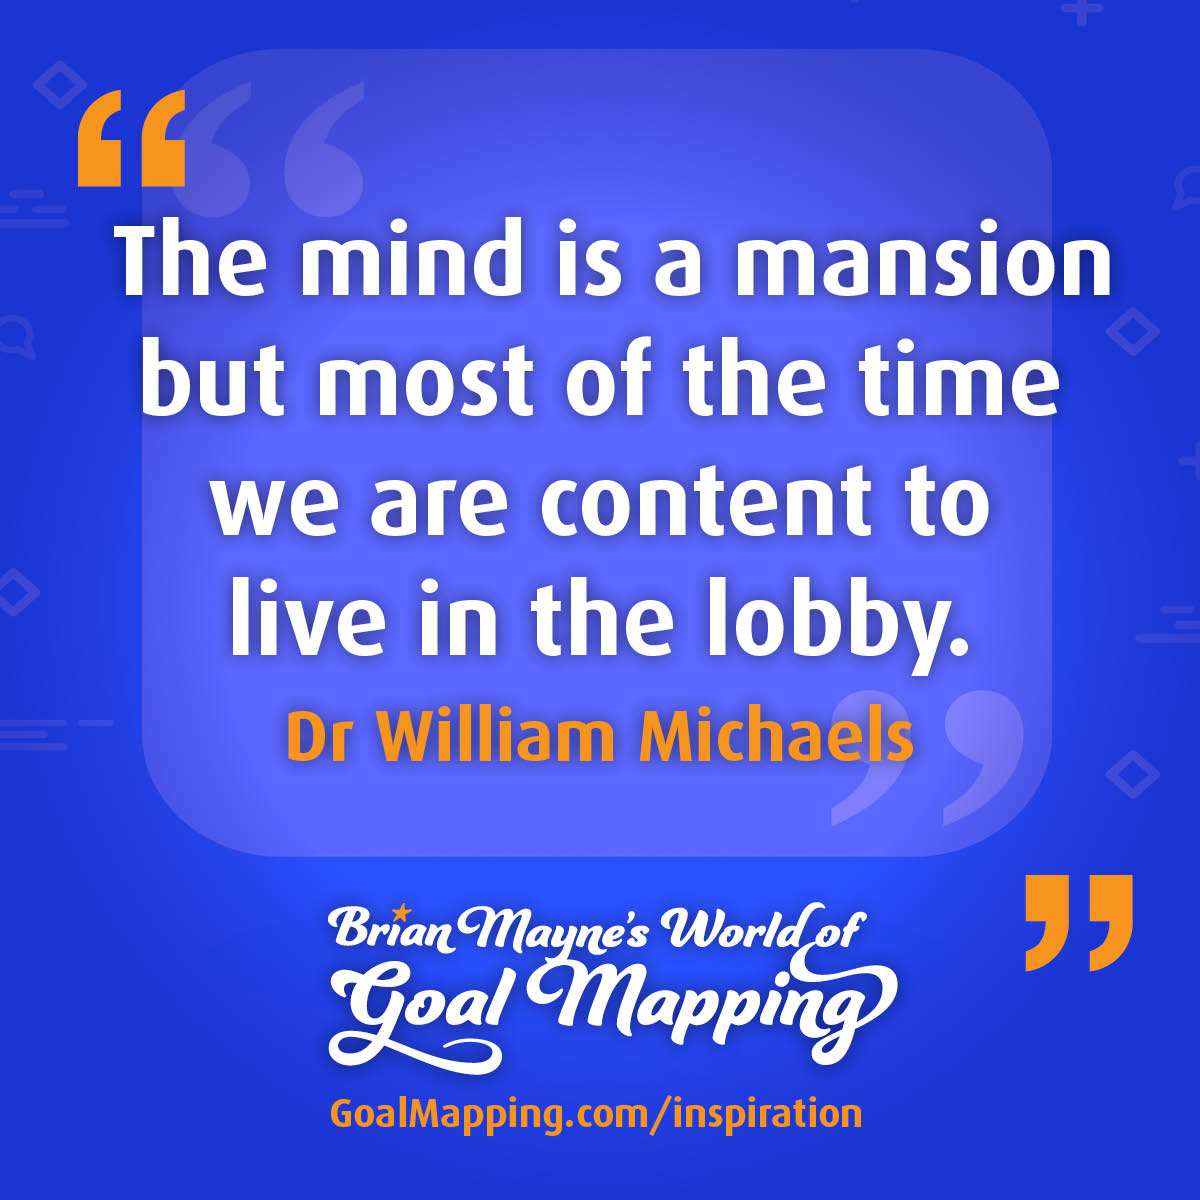 "The mind is a mansion but most of the time we are content to live in the lobby." Dr William Michaels